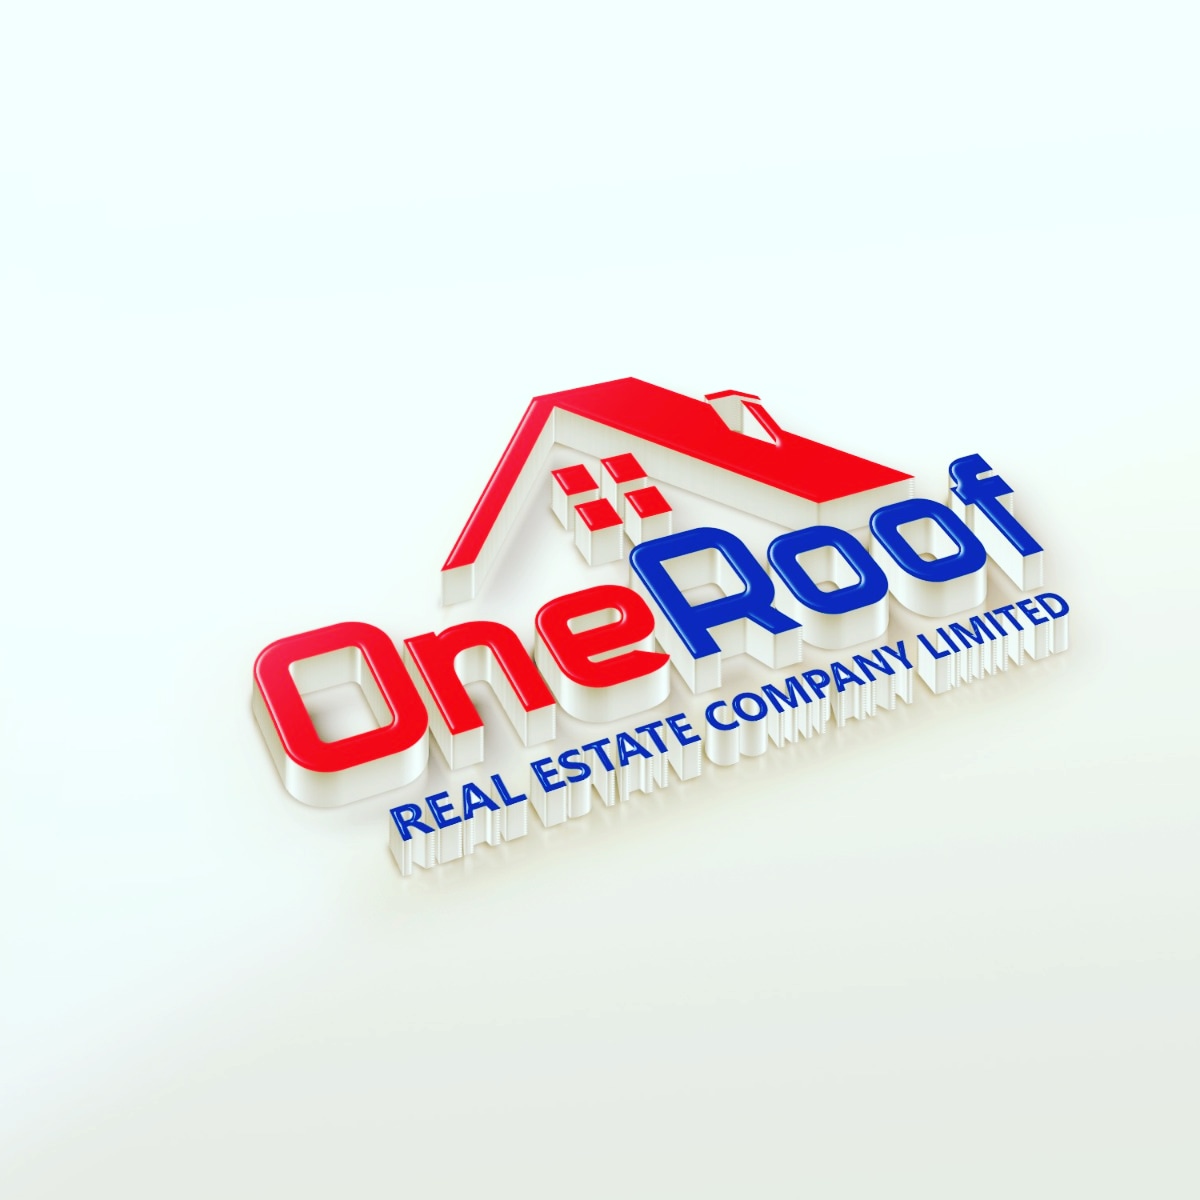 ONEROOF REAL ESTATE COMPANY LIMITED